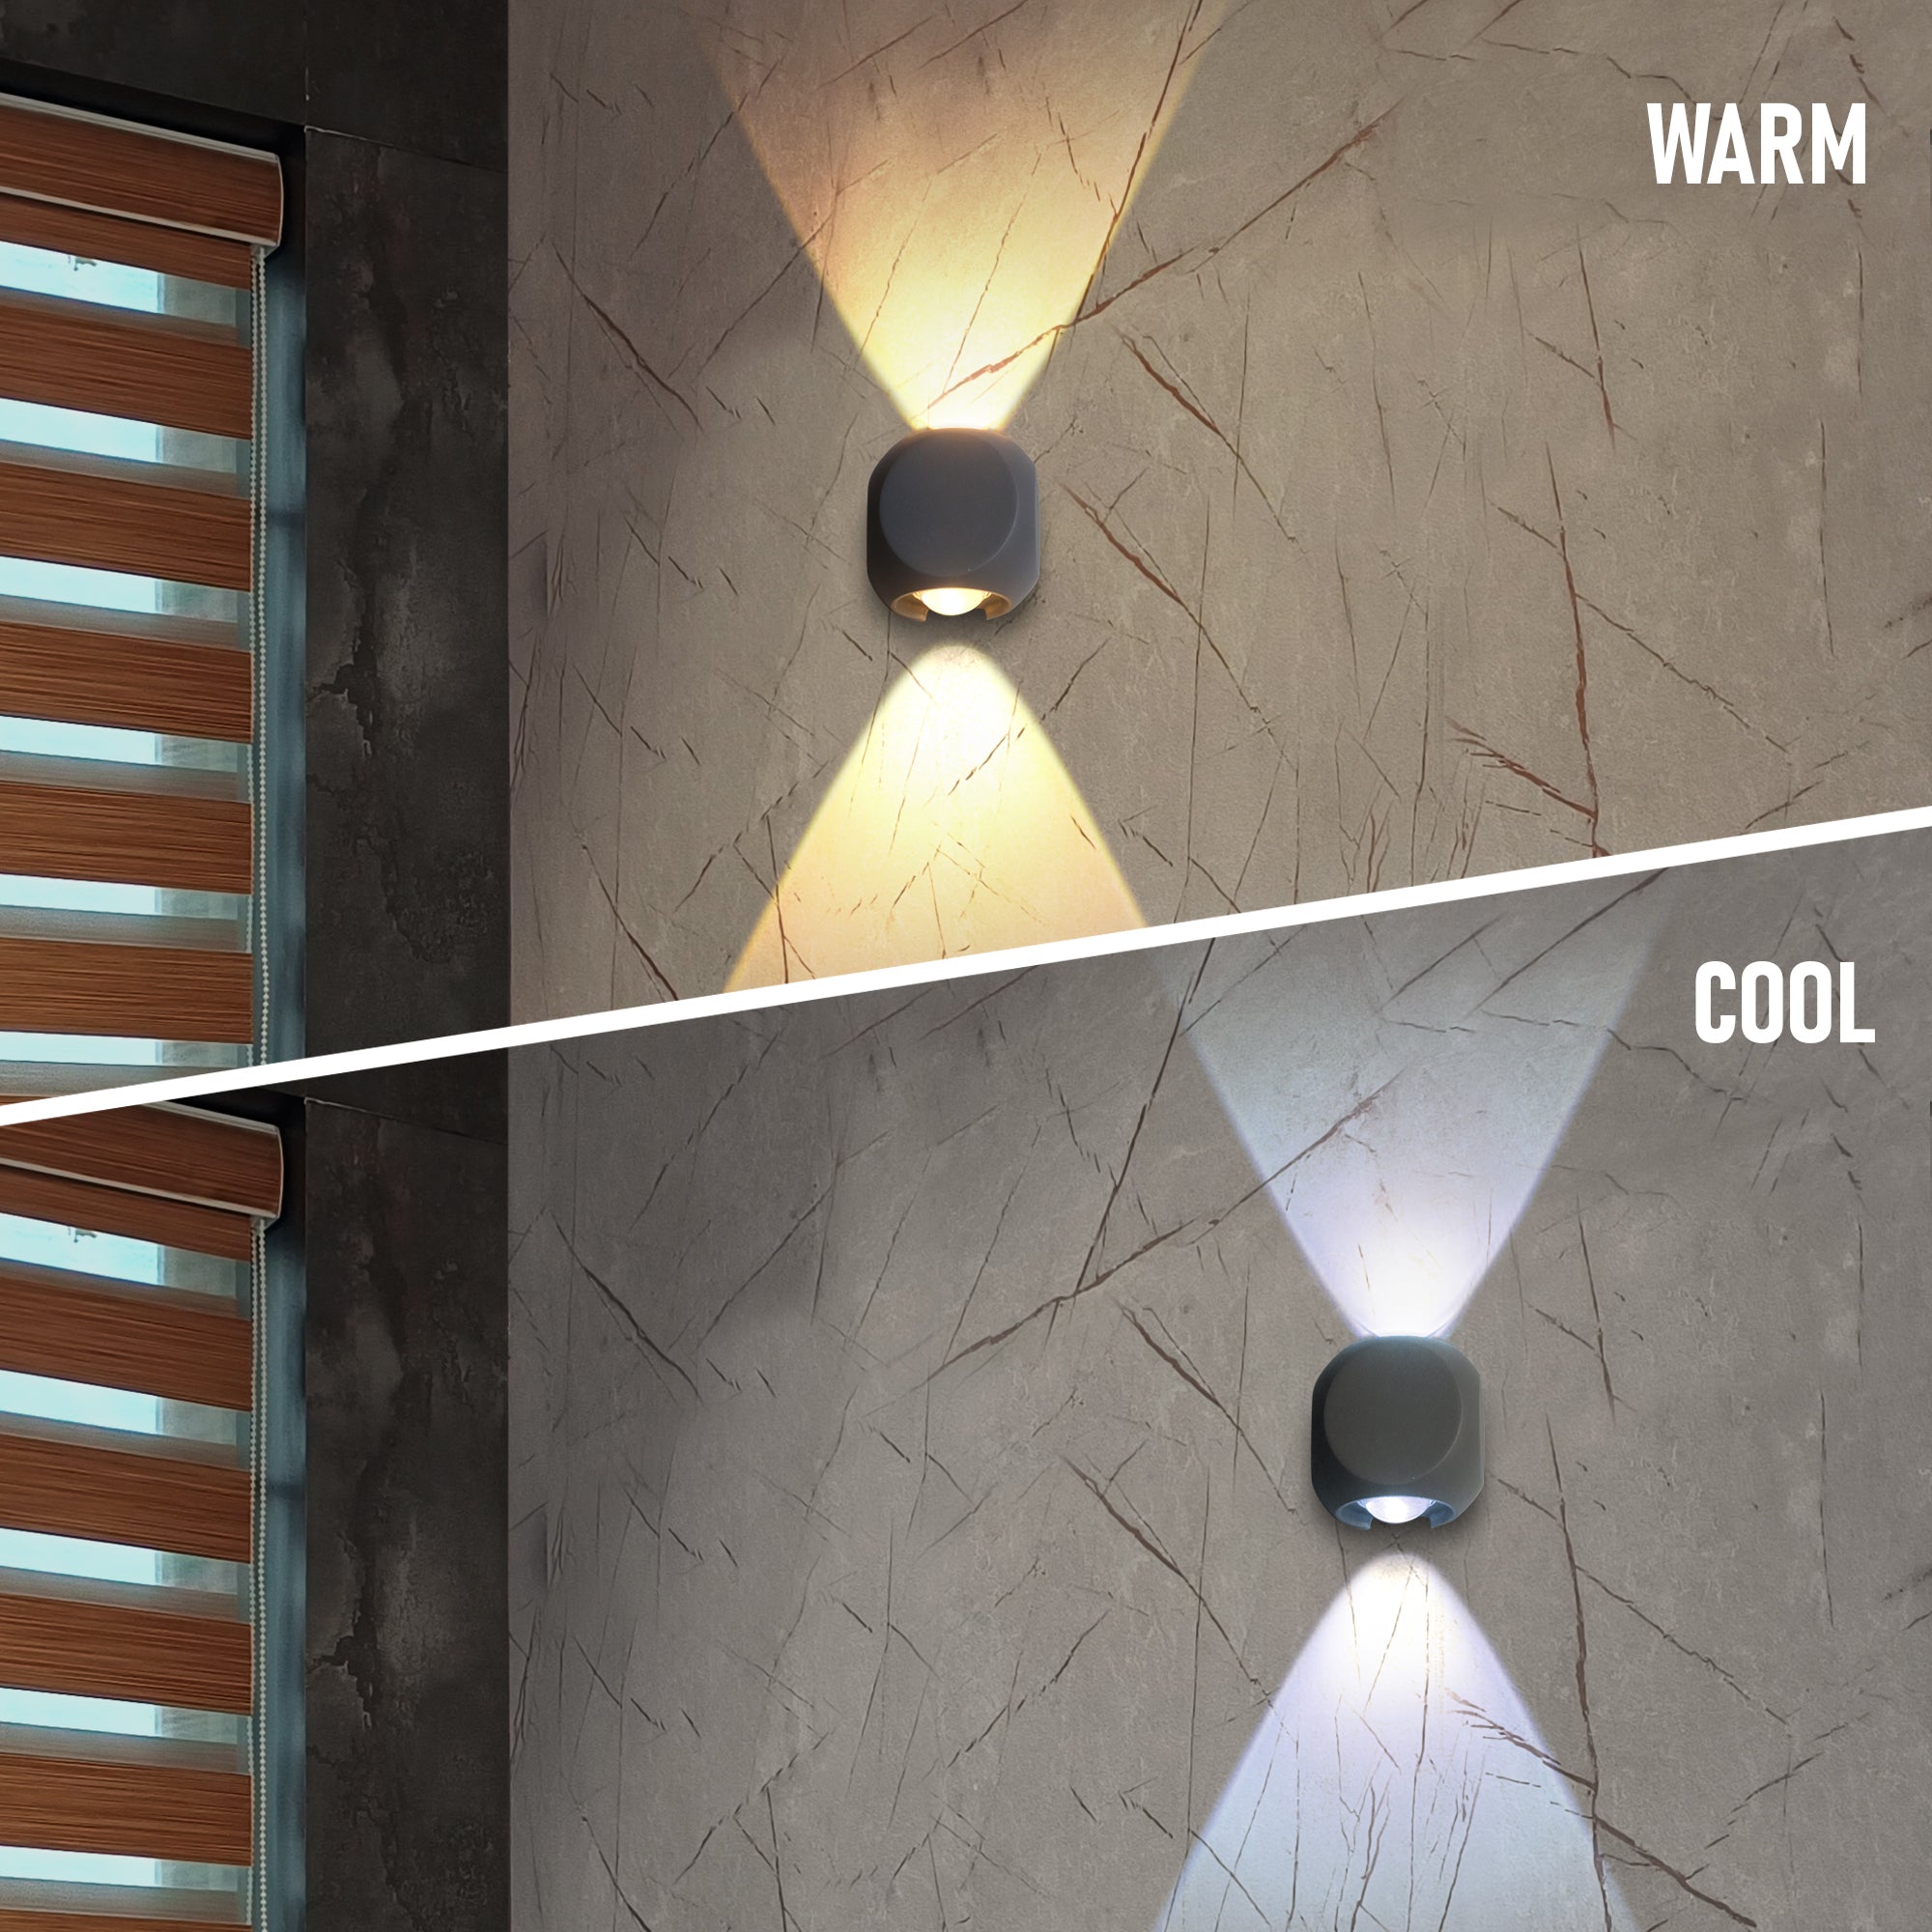 Cool and warm lighting comparison of Ignite up and down led wall light #type_2 way